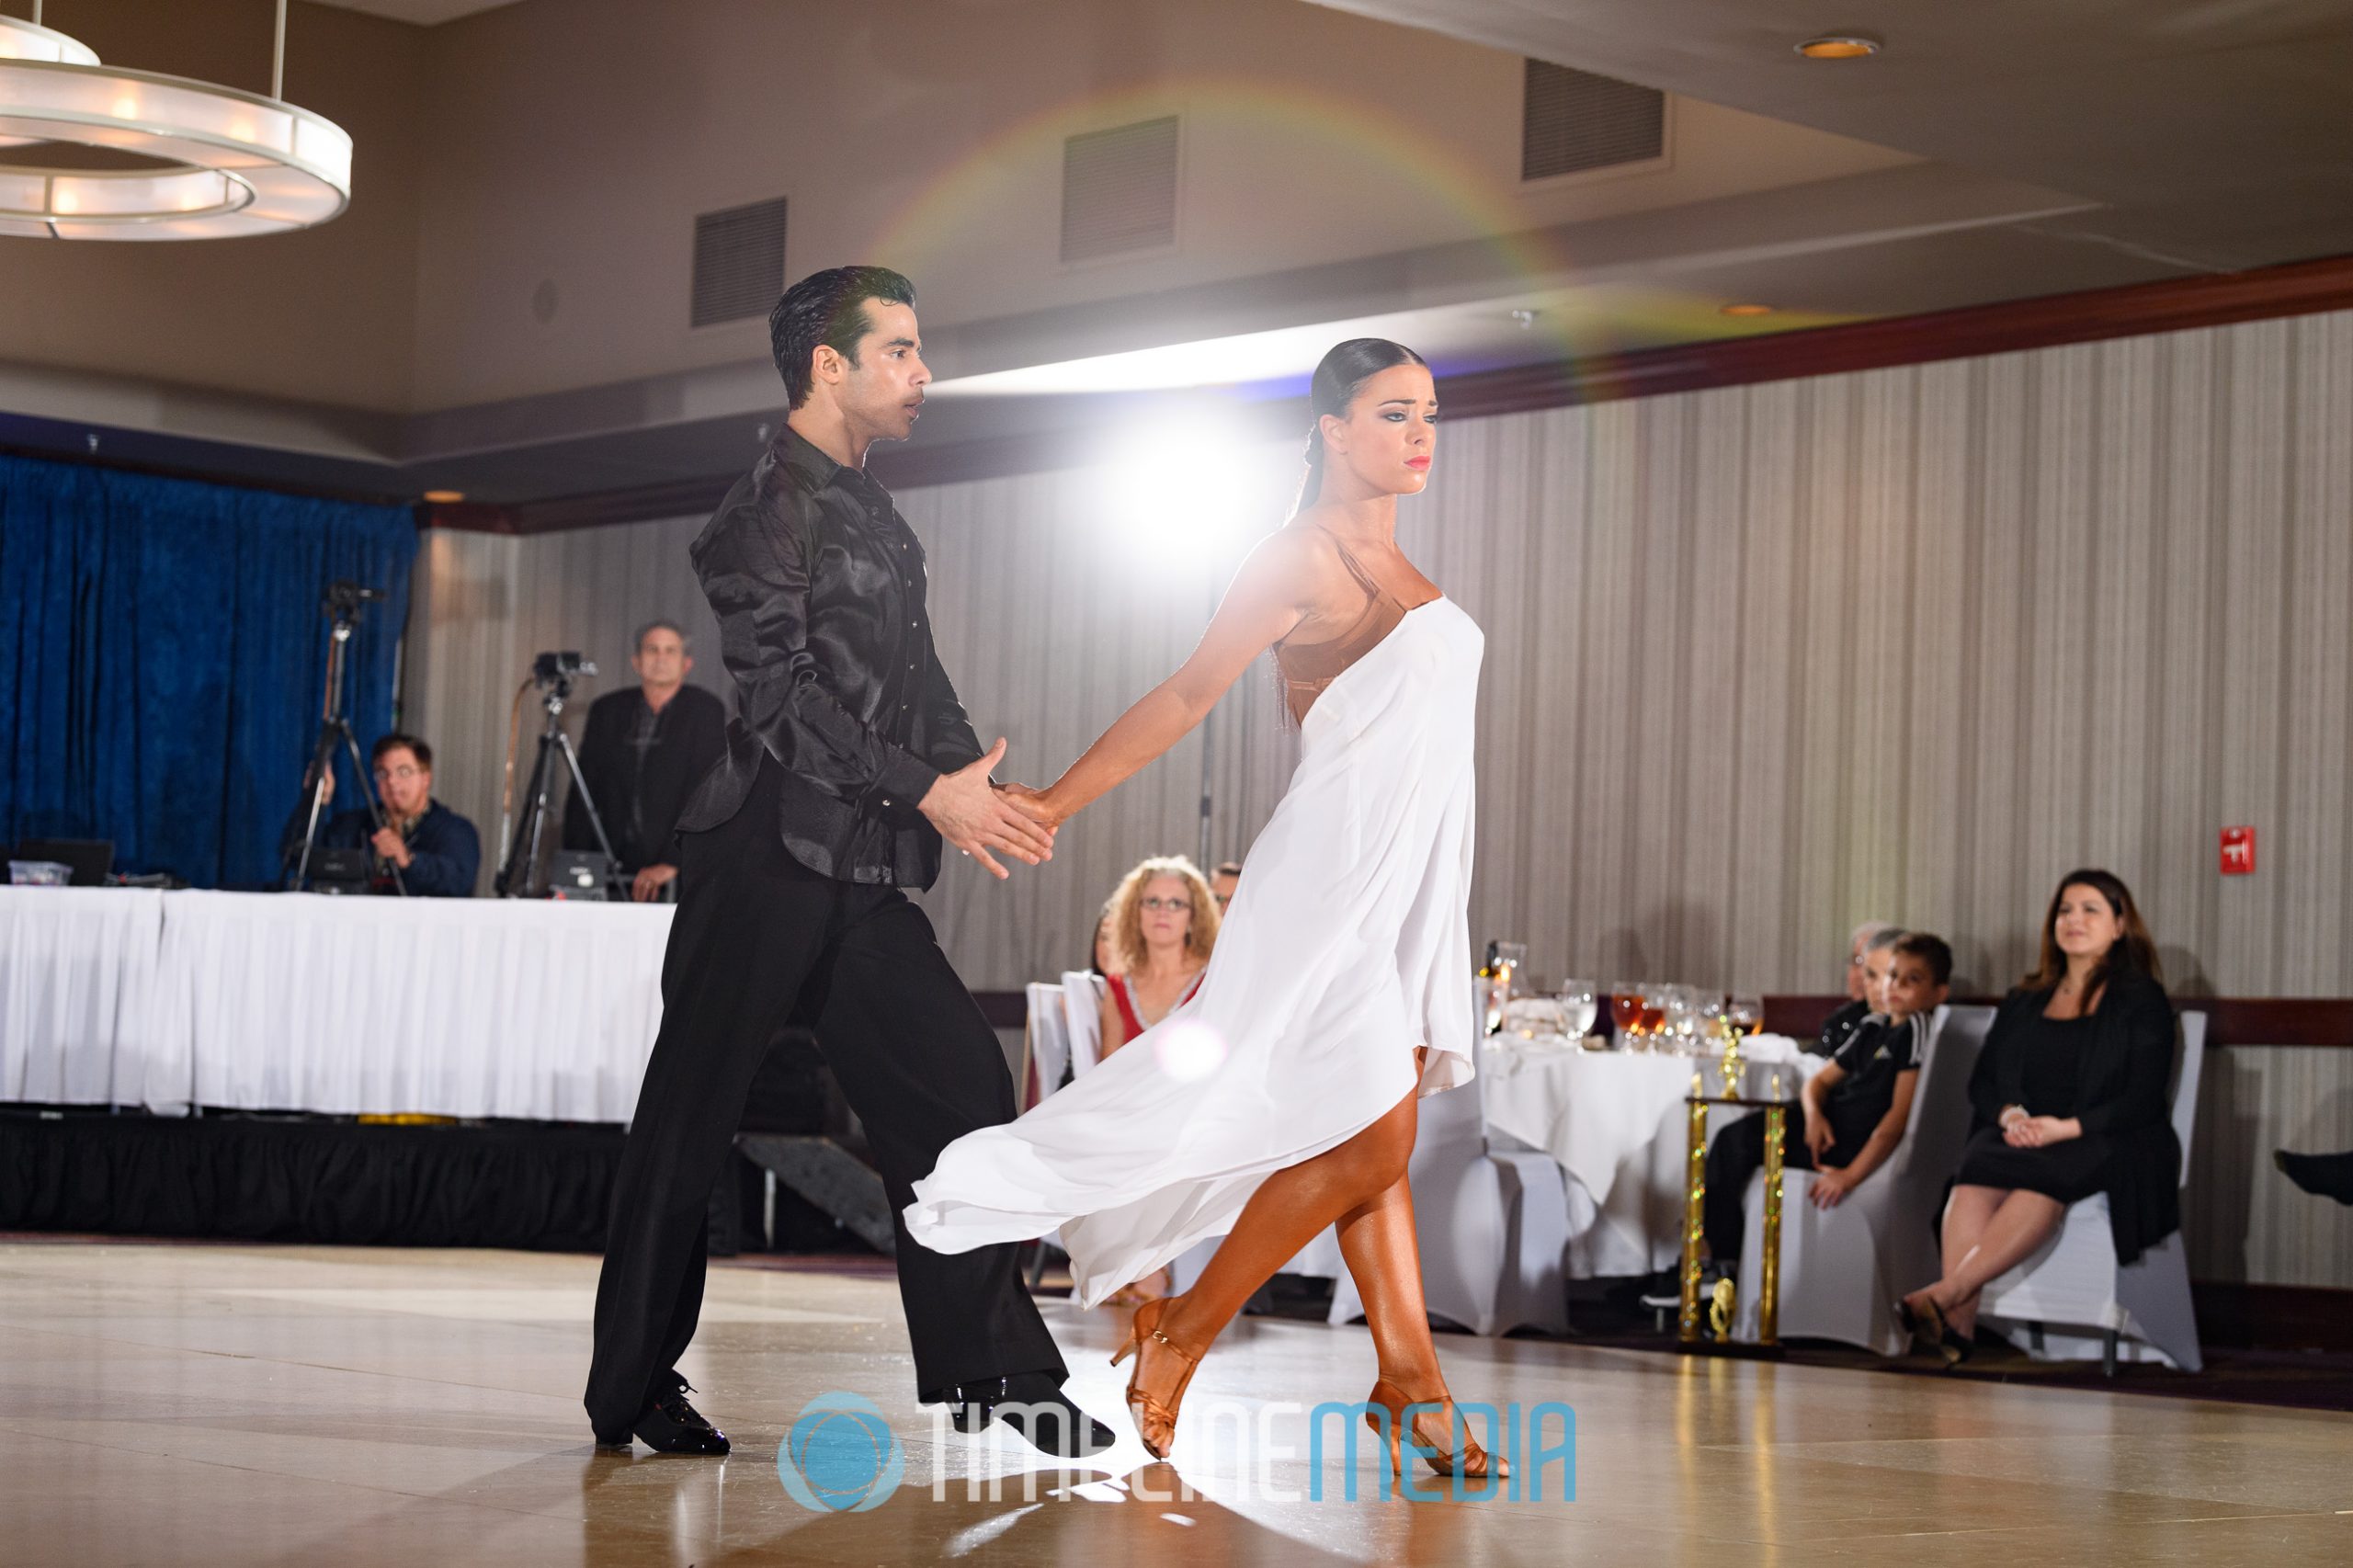 Tal Livshitz and Ilana Keselman dancing a professional show at the Fantasy Ball Dancesport Competition ©TimeLine Media